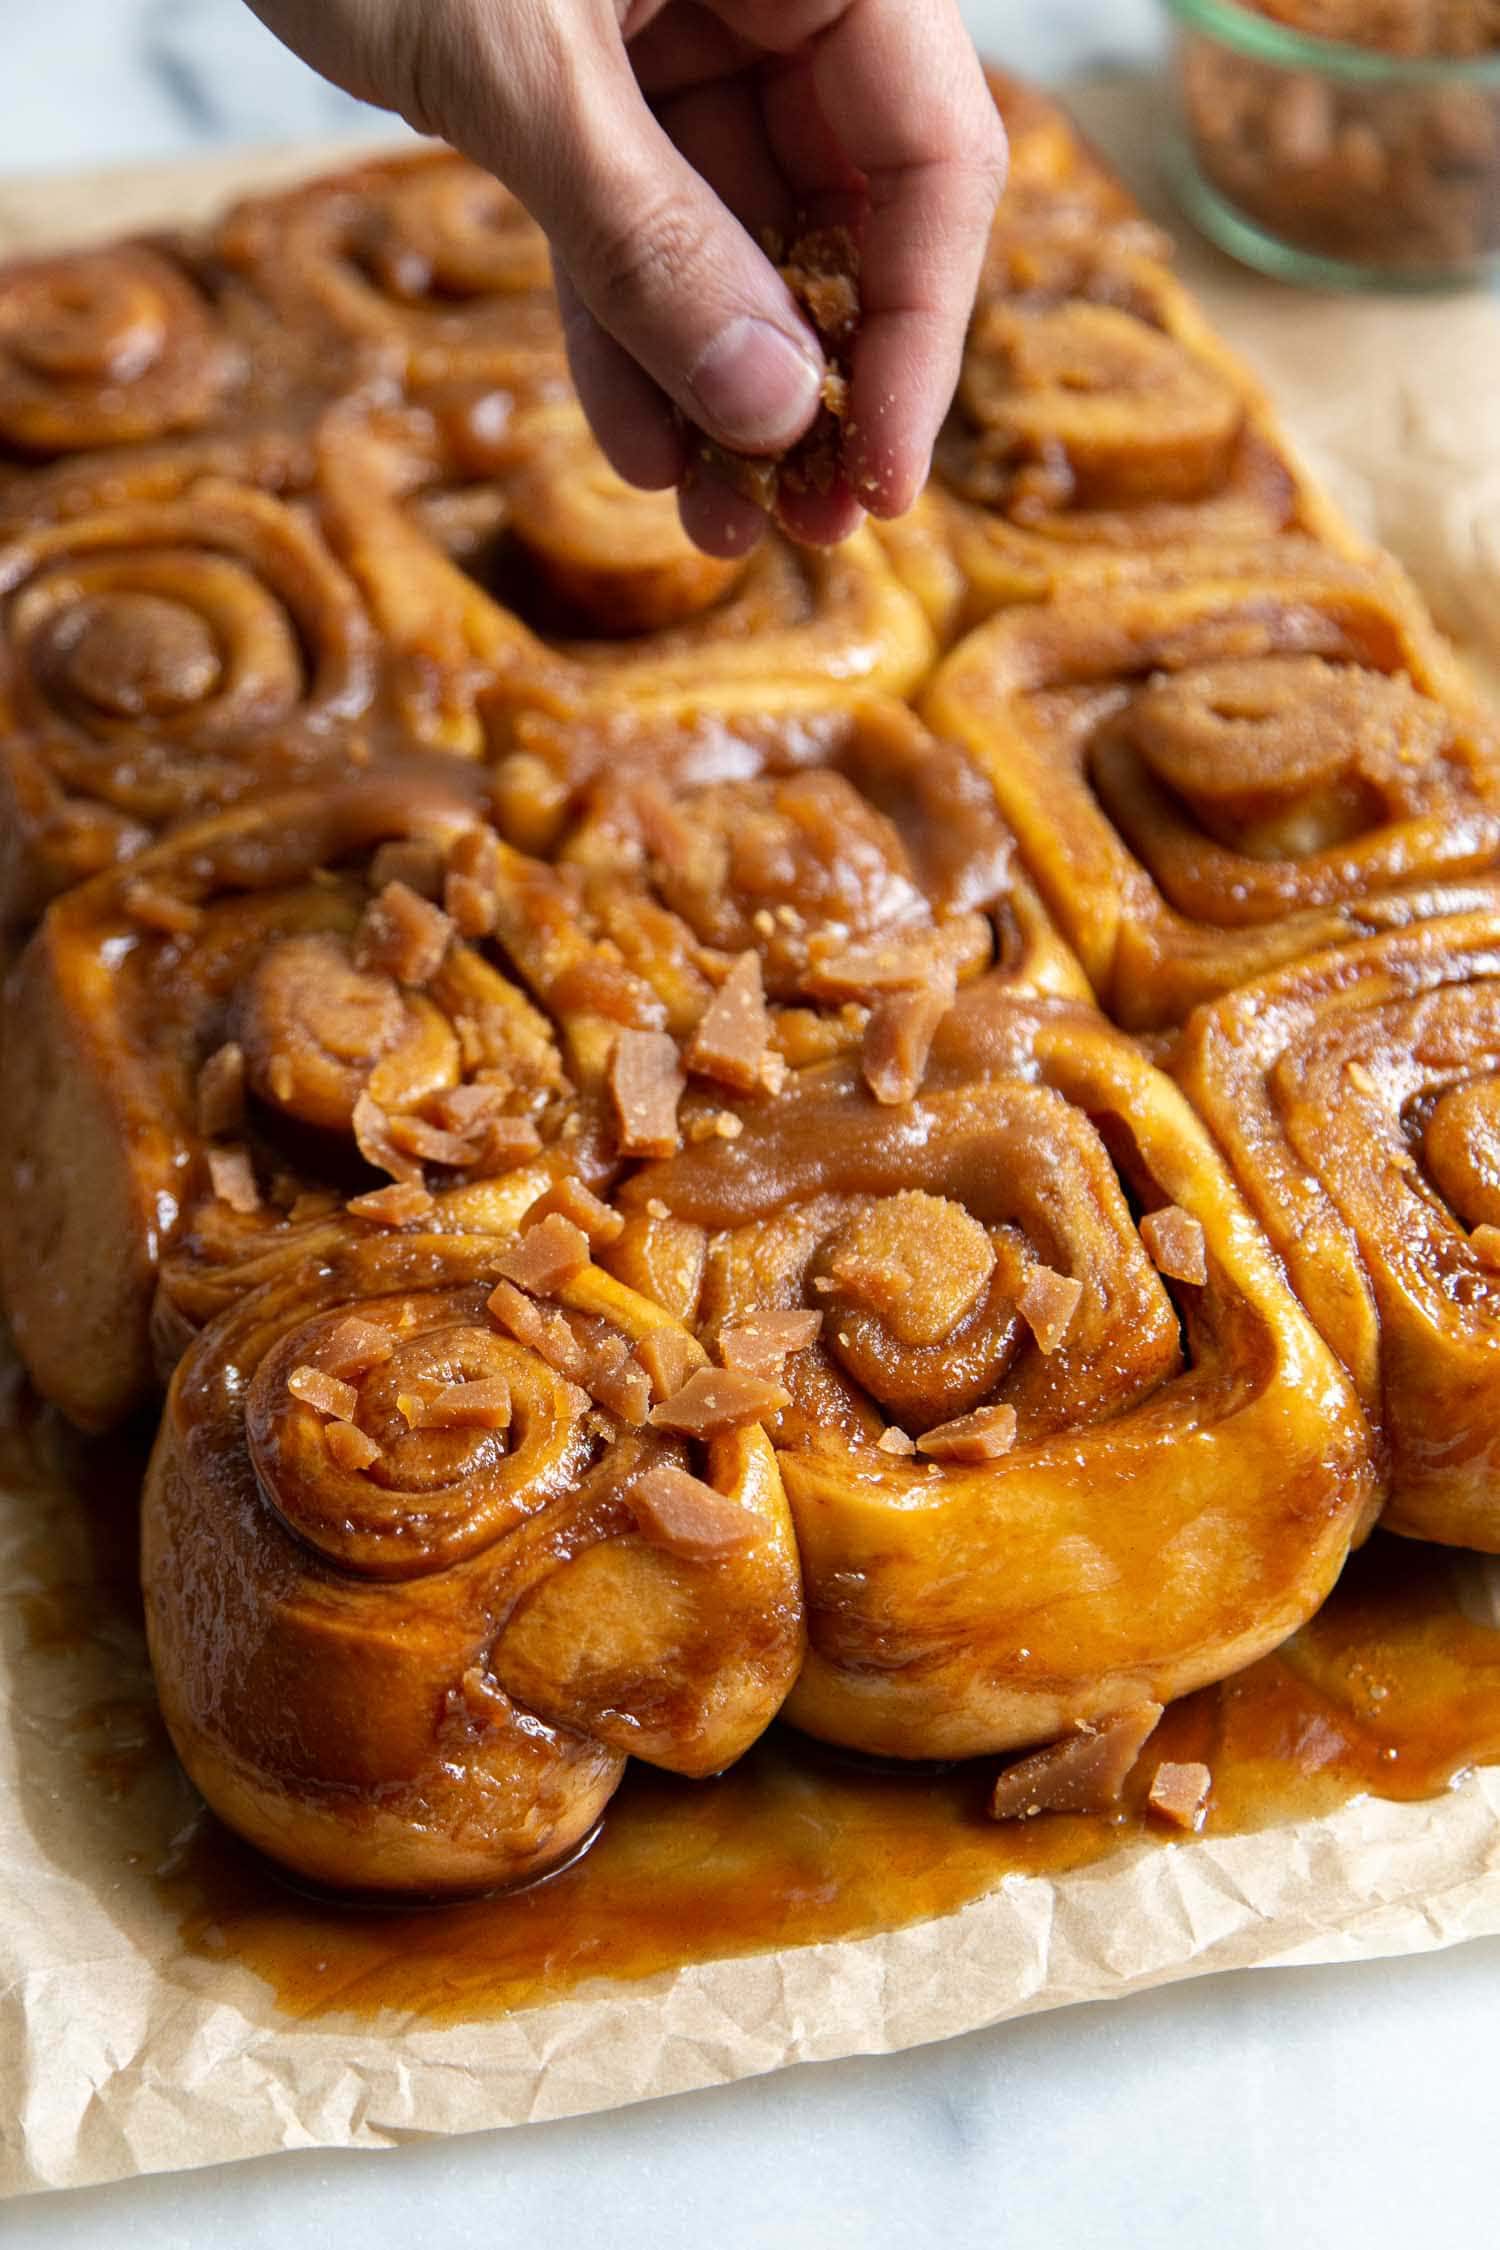 Toffee Sticky Buns. These warm and fluffy buns are filled with cinnamon sugar, coated with a sweet molasses glaze, and topped with chopped toffee bits! #breakfast #brunch #holidays #toffee #stickybuns